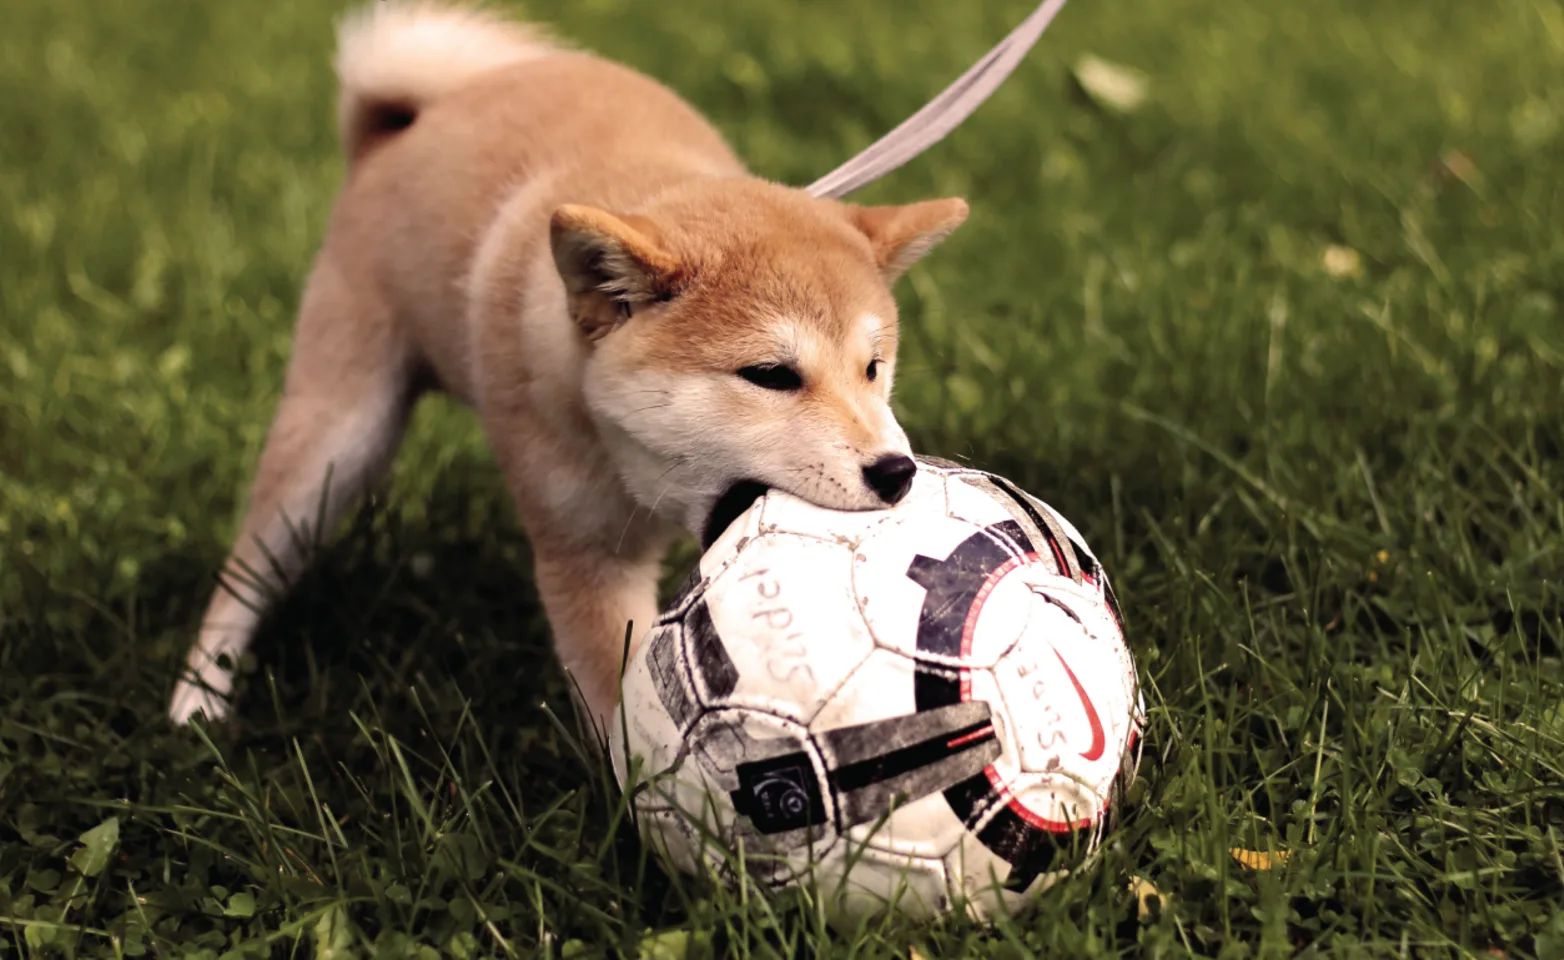 Little dog on a leash playing with a soccer ball in its mouth.